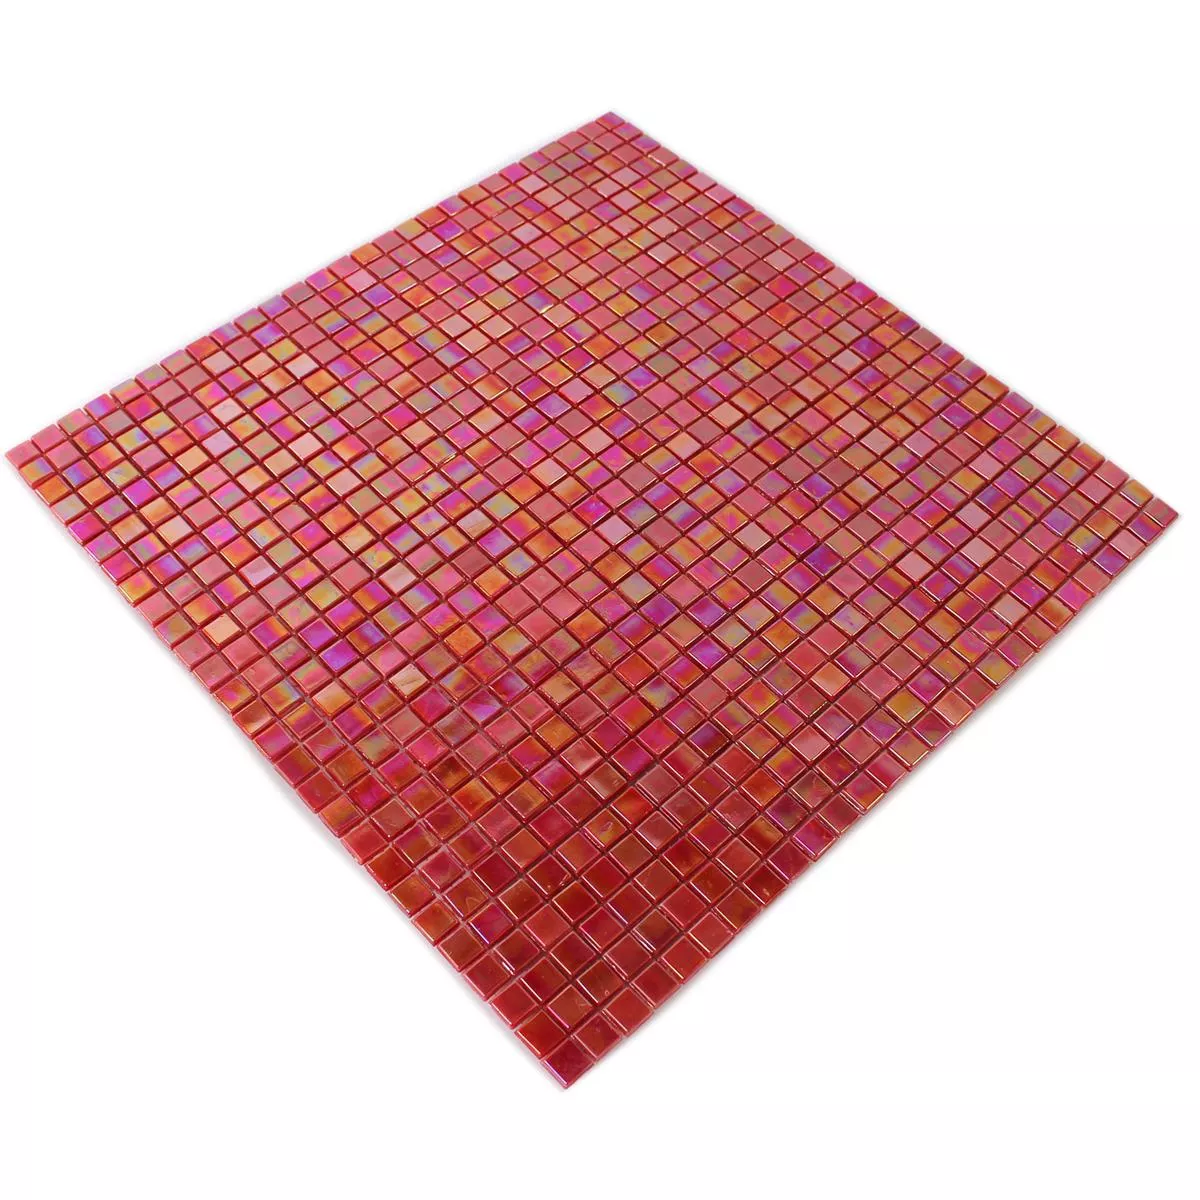 Sample Mosaic Tiles Glass Nacre Effect Red